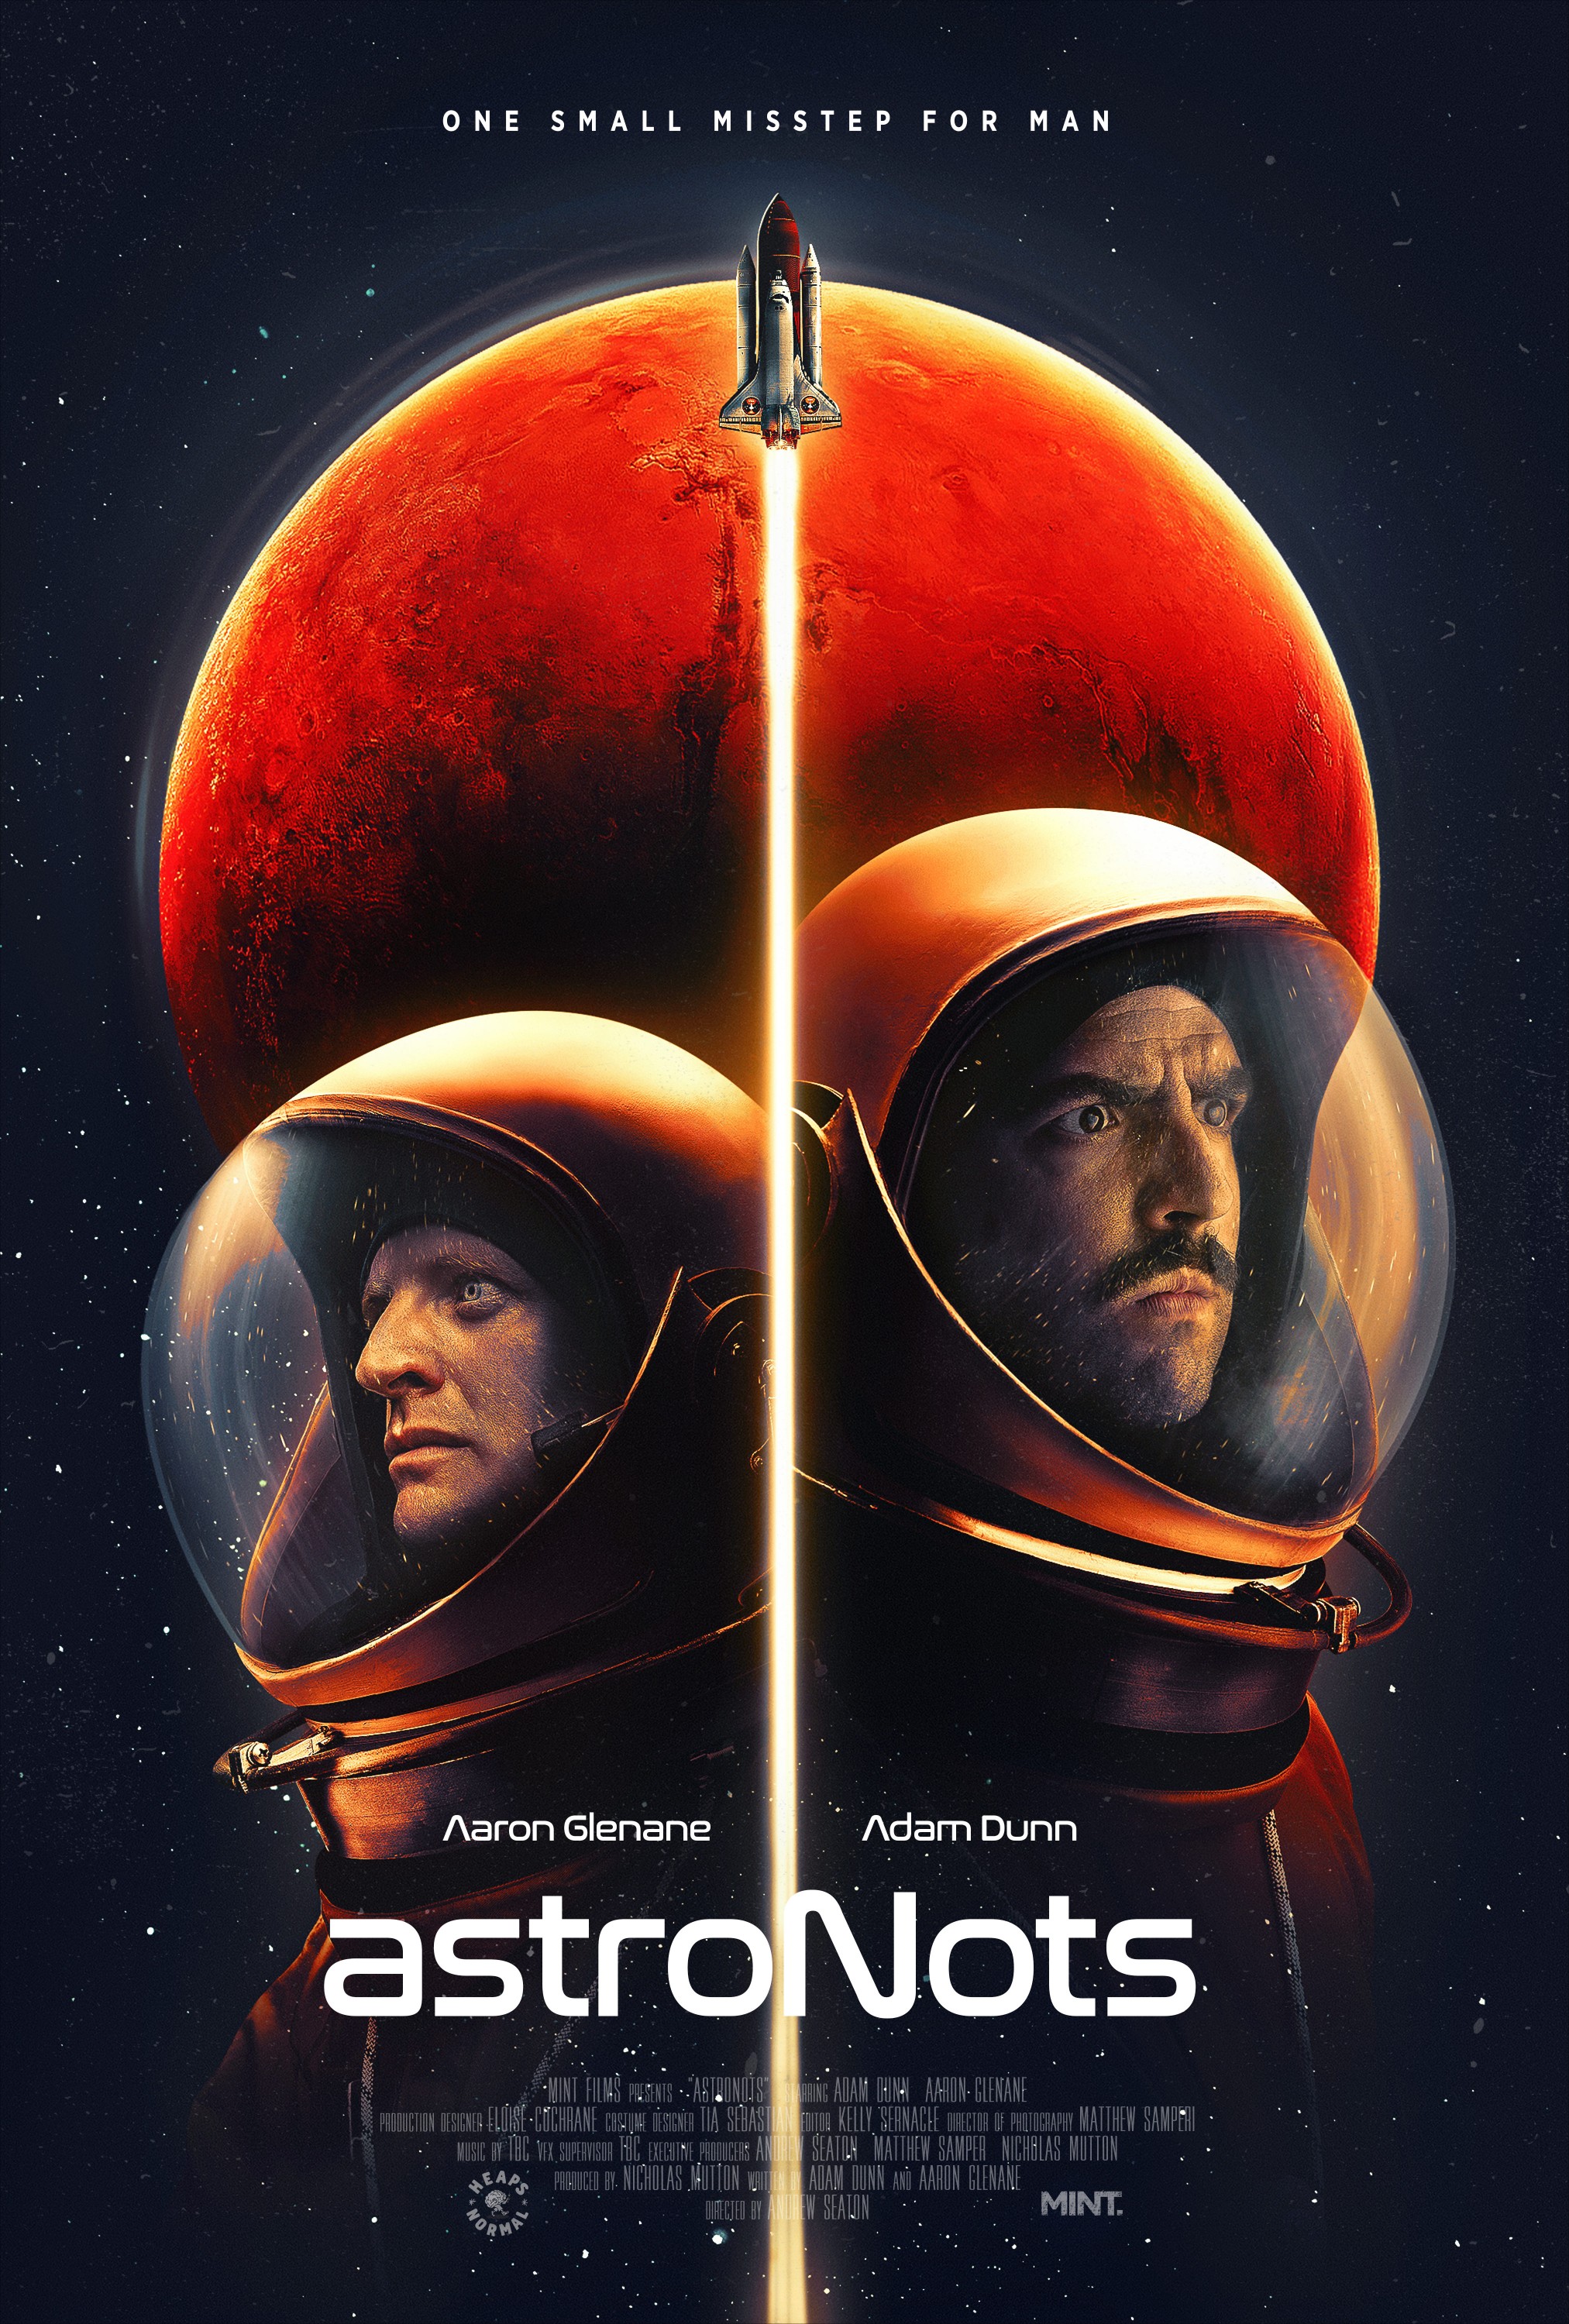 Mega Sized Movie Poster Image for Astronots